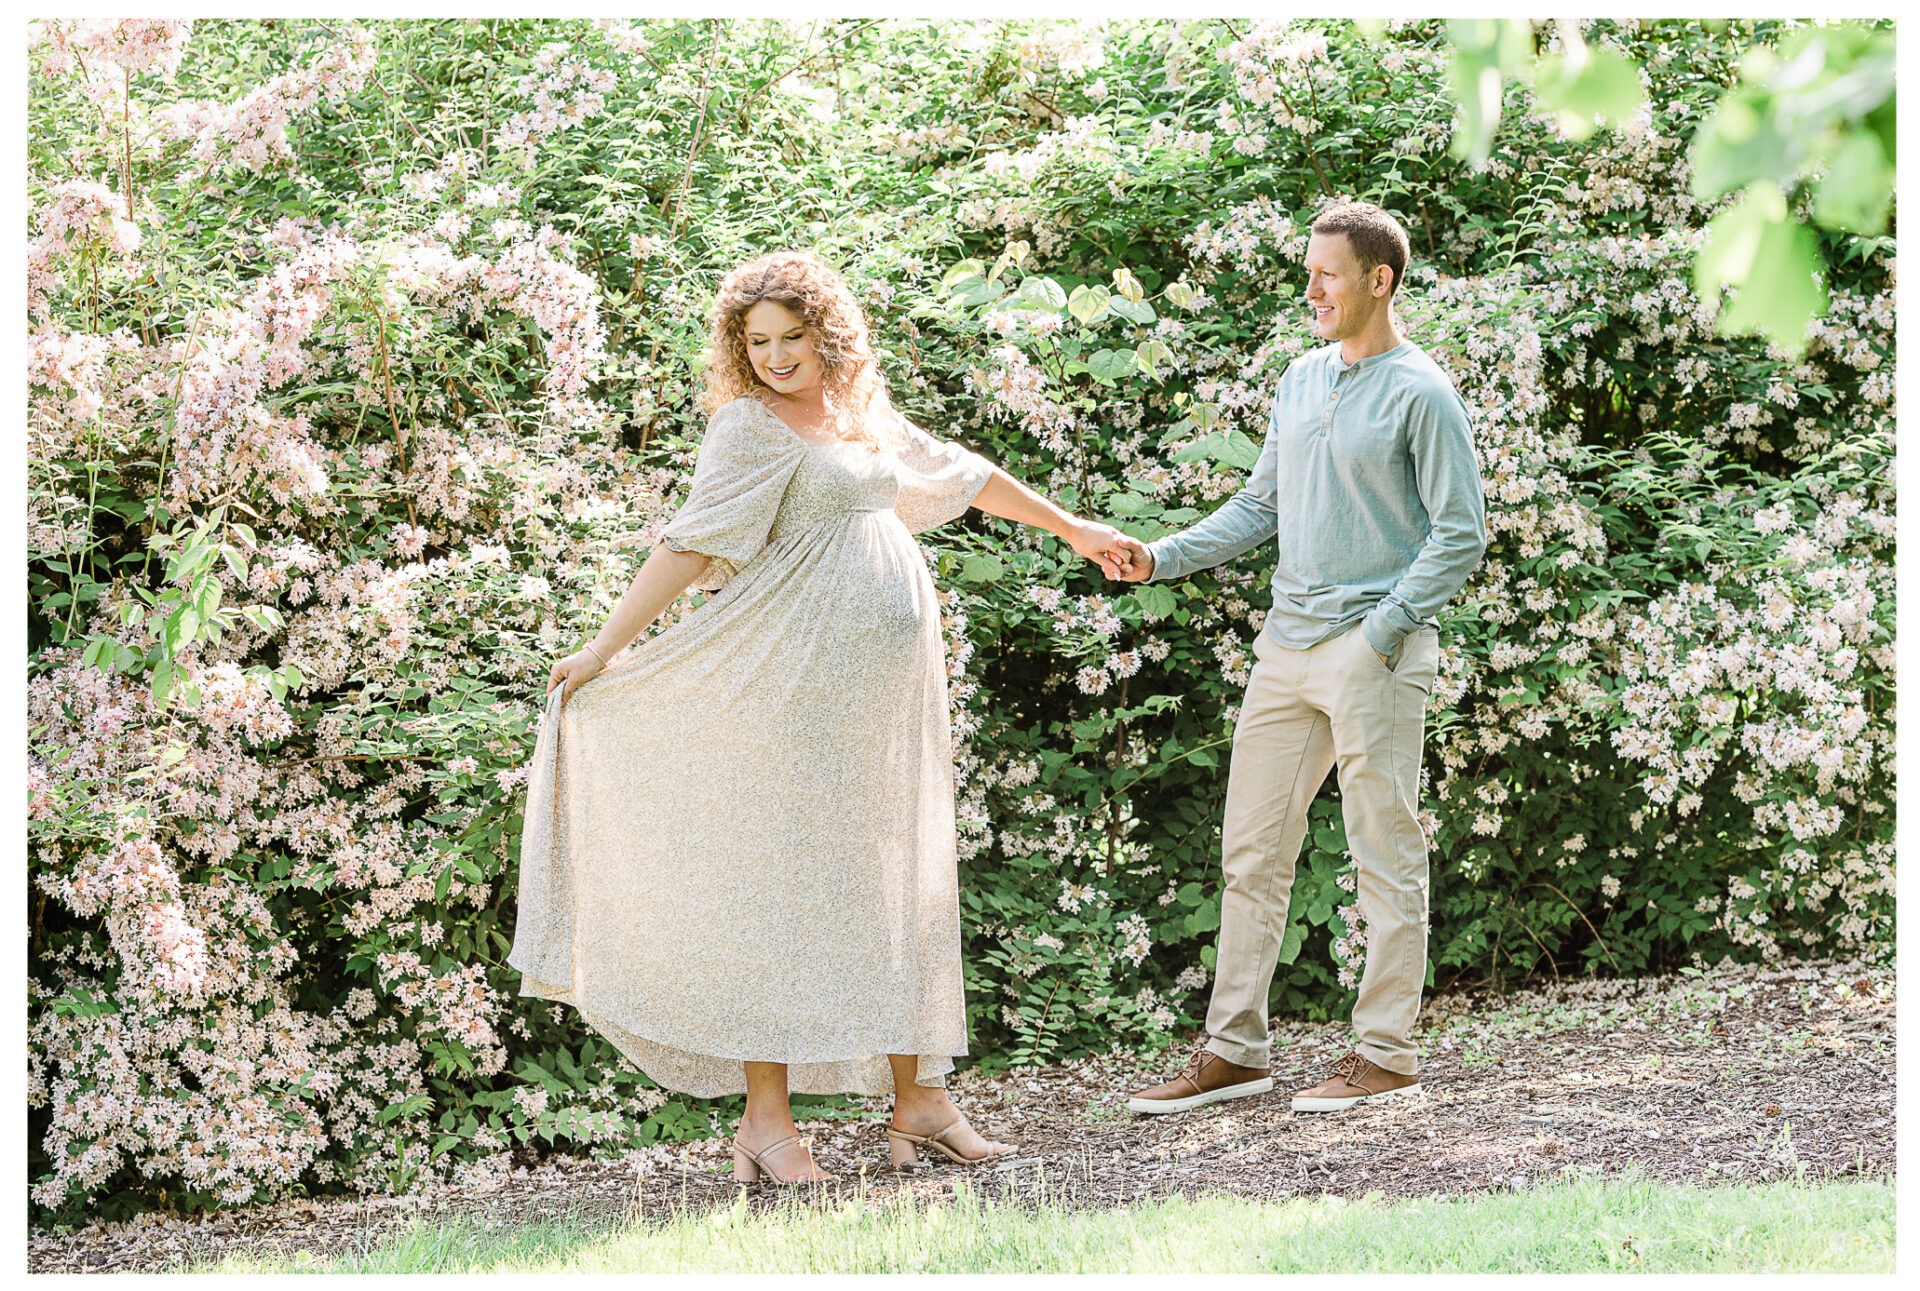 Winter Freire Photography | maternity session outdoors | husband and wife dancing together